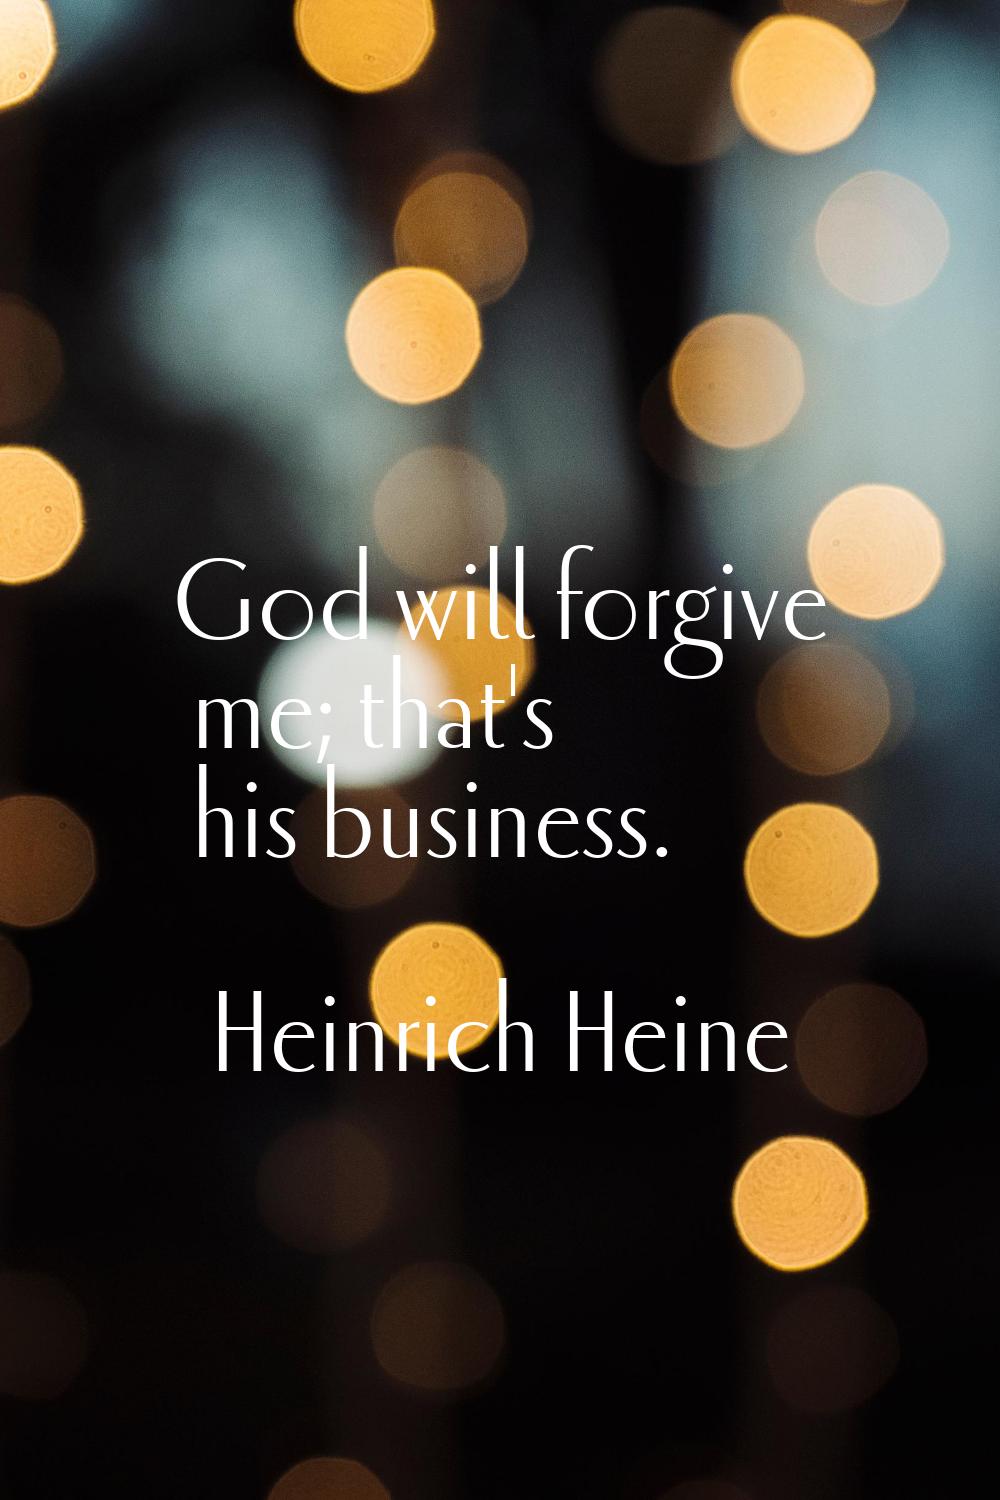 God will forgive me; that's his business.